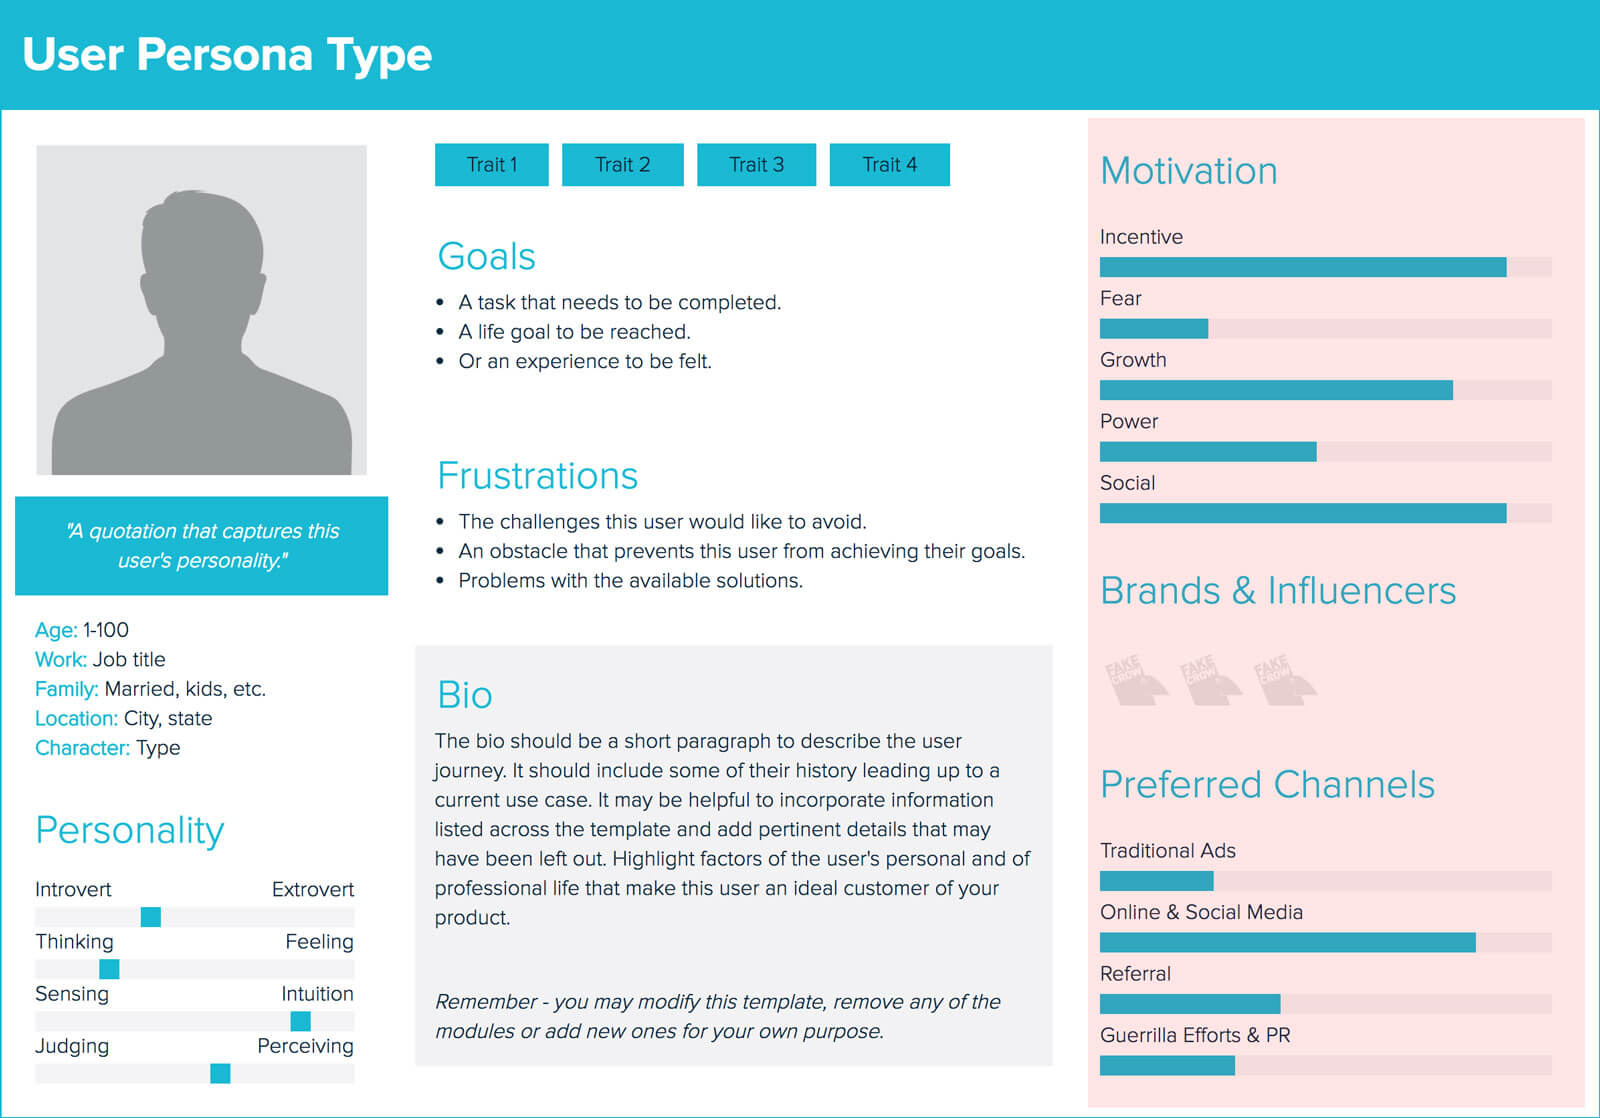 How To: Create a User Persona - Best Guide | Xtensio